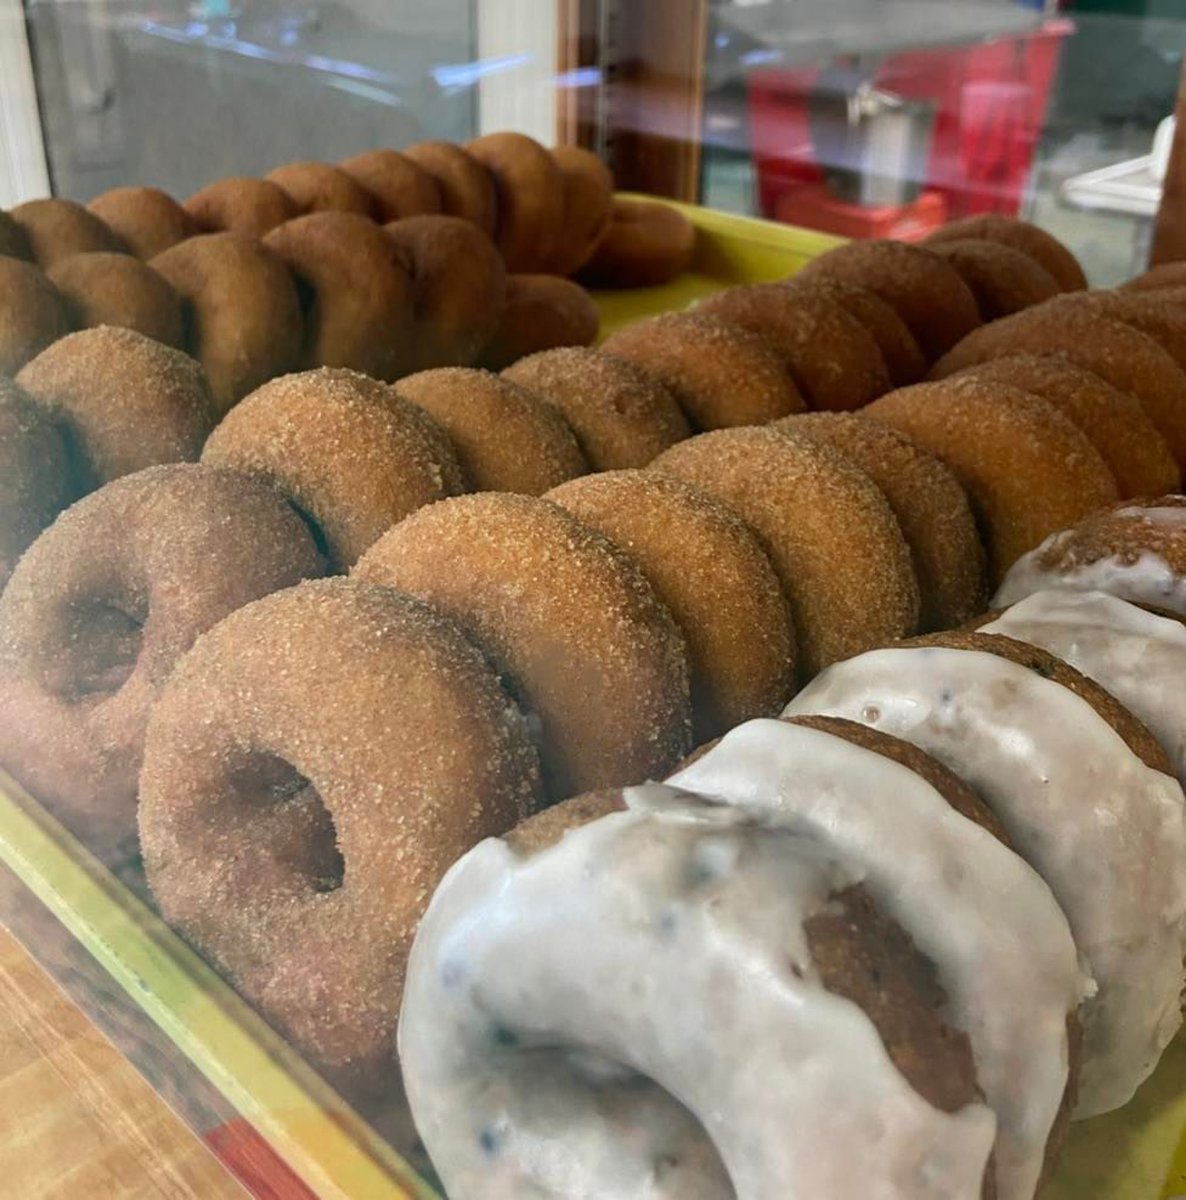 There’s nothing quite like a donut to make your Monday better! ⭐️ Stop by for cider, donuts, pie, apples, squash, vinegar, and popcorn. Everything is made in Michigan! ⭐️ Open 9:00 AM - 5:30 PM. #RochesterCiderMill #Donuts #AppleCider #MichiganMade #FamilyOwned #OaklandCounty